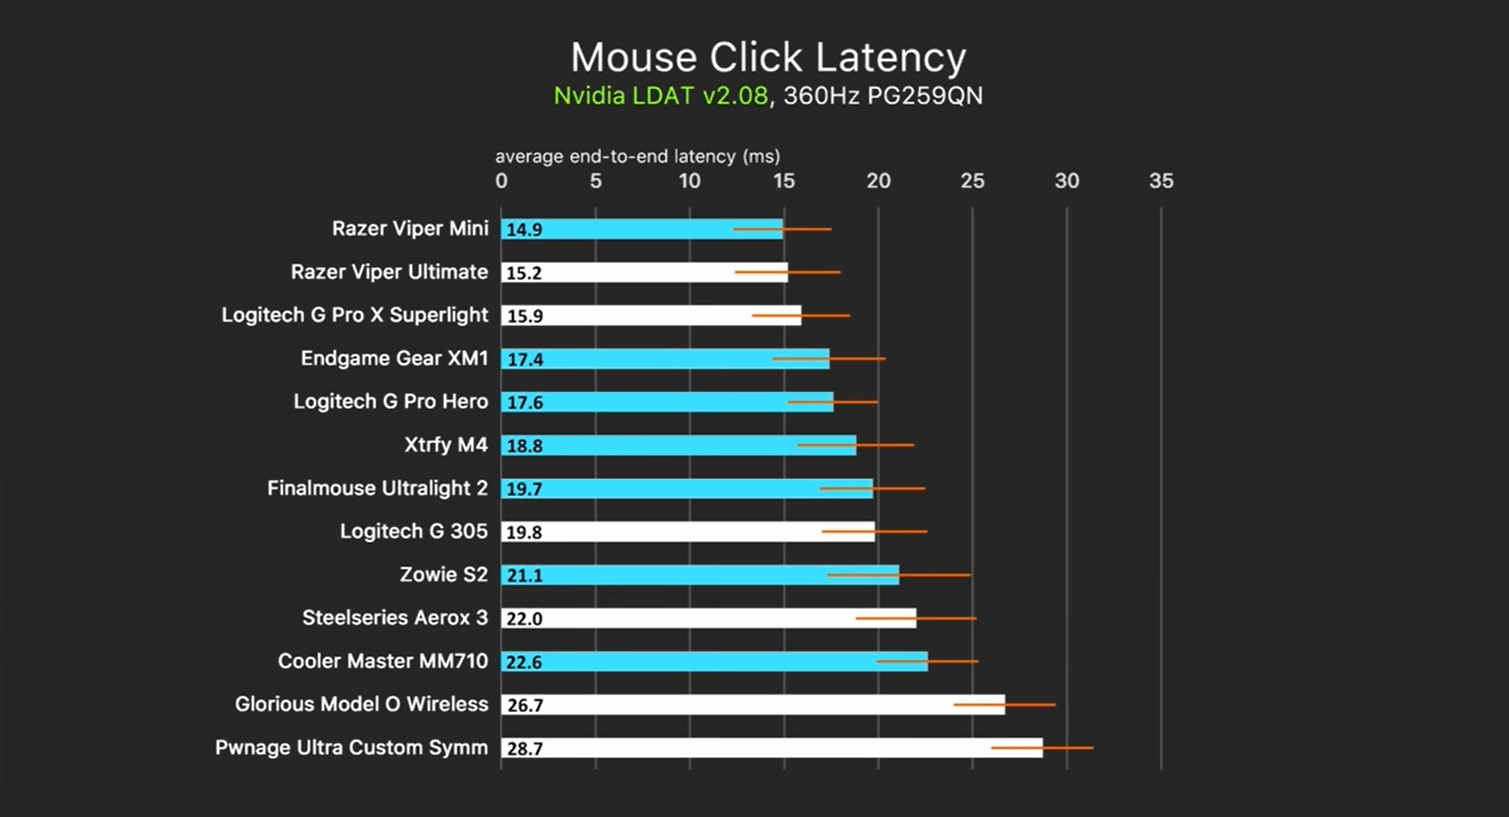 Low latency gaming. Mouse Wireless input lag. Latency. Gaming Low latency. Latency Test.